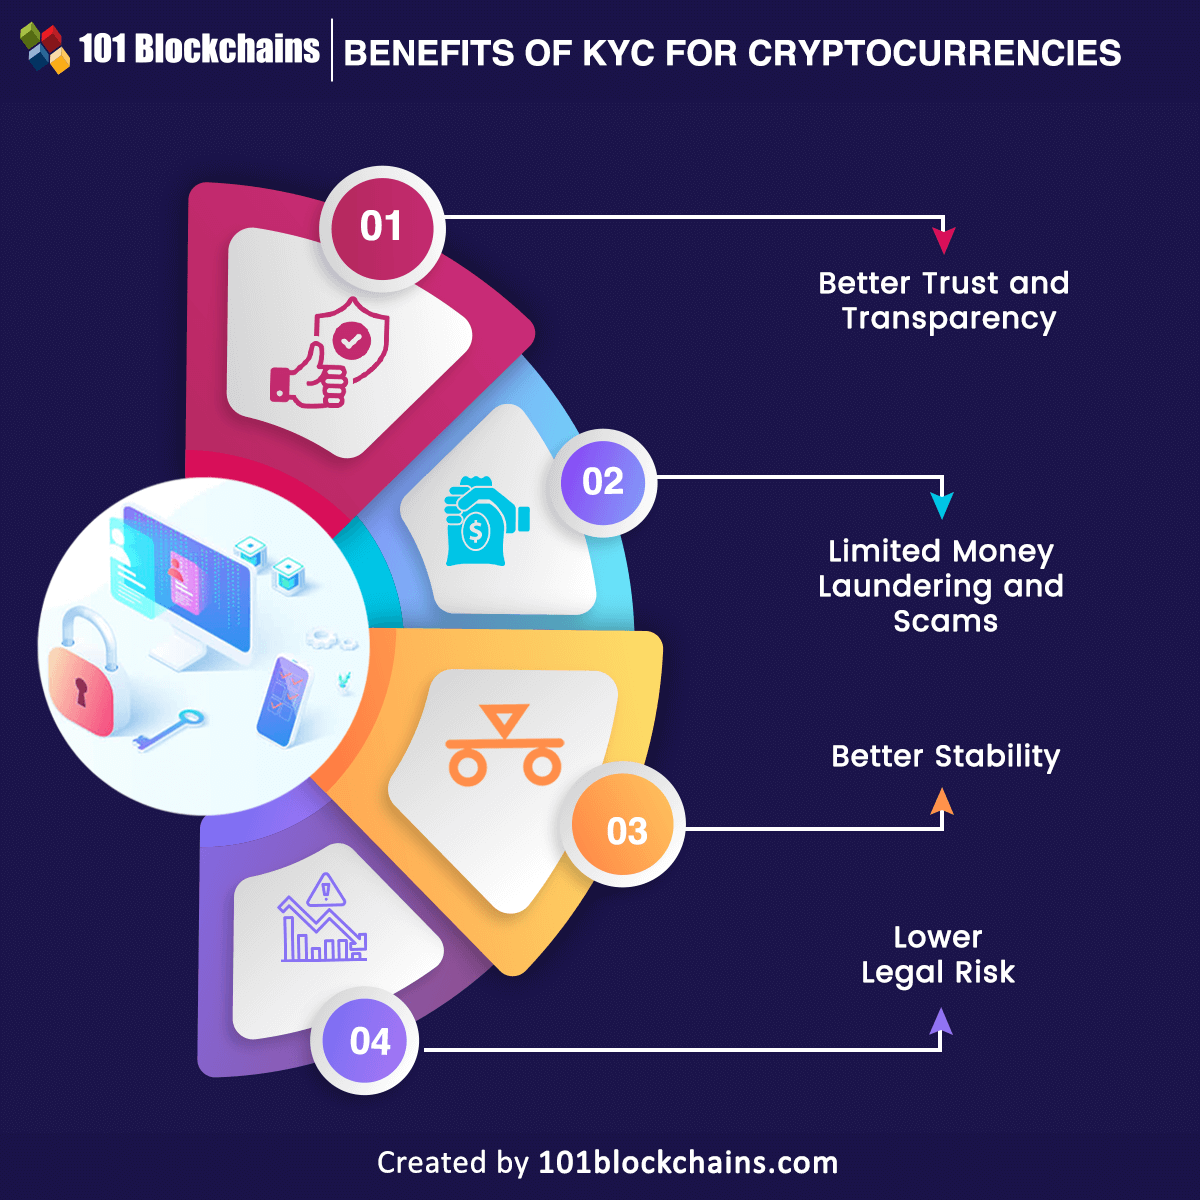 Benefits of KYC for Cryptocurrencies